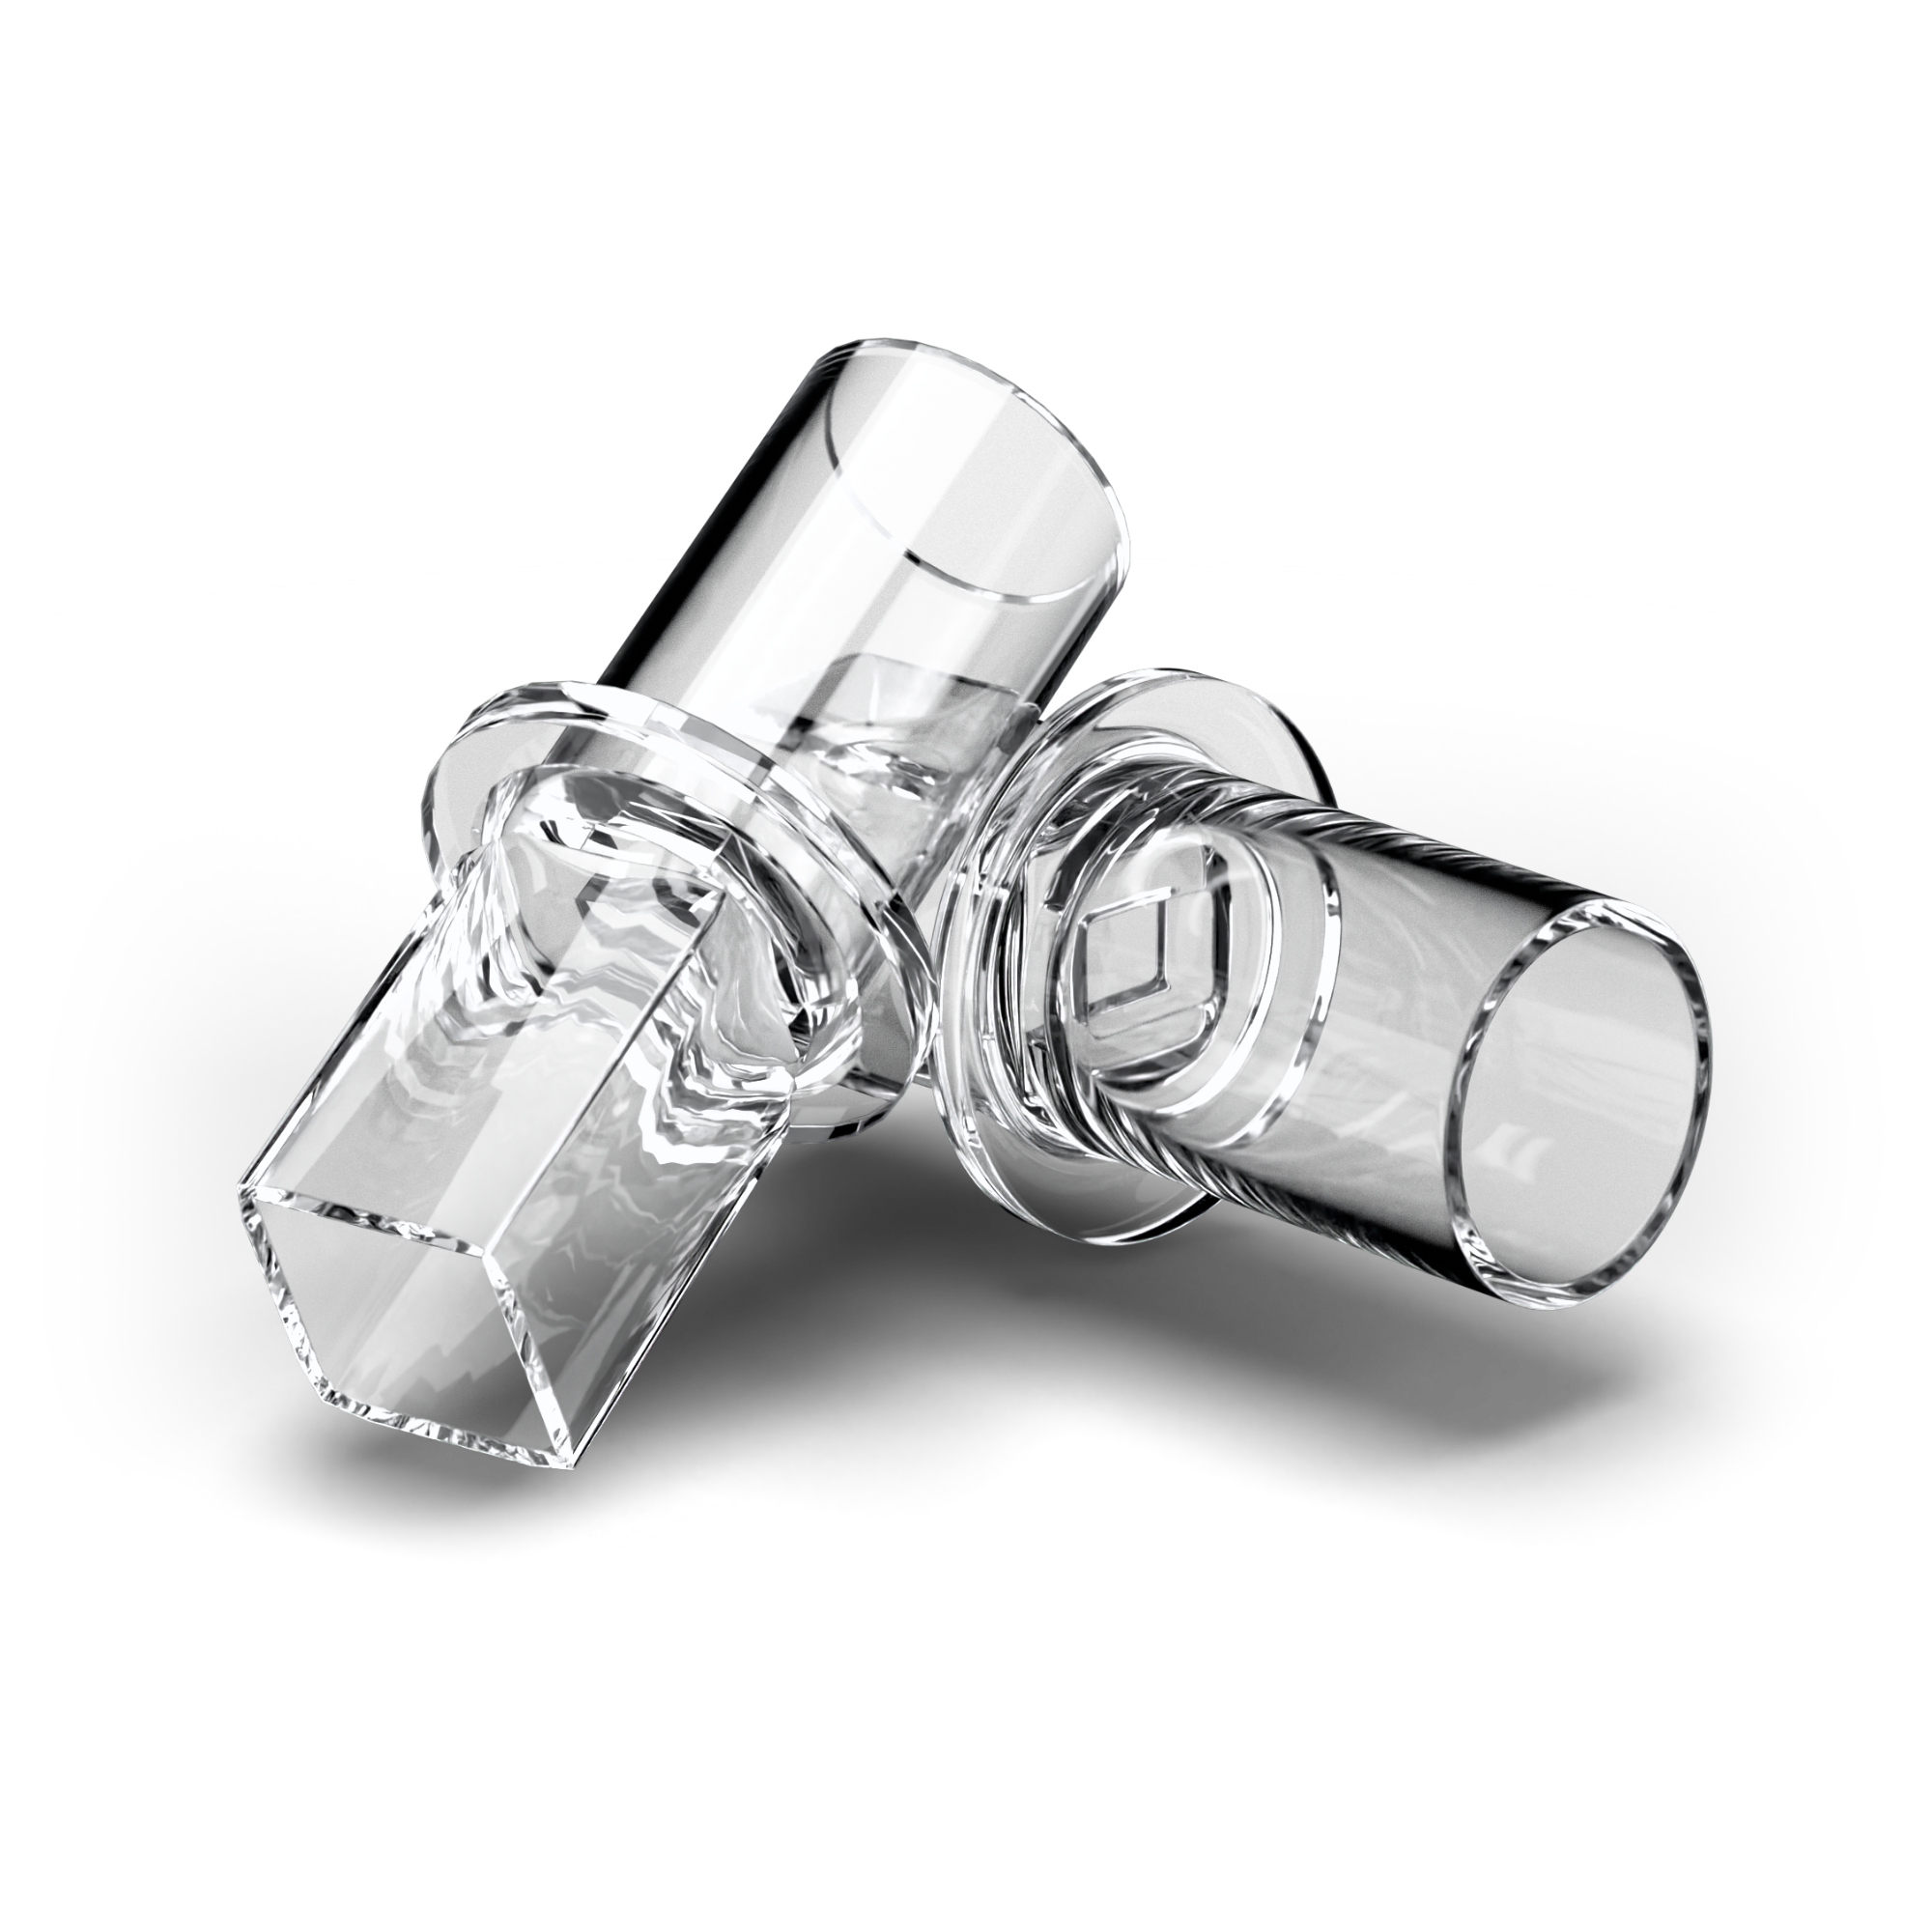 BACtrack Keychain Breathalyzer Mouthpieces